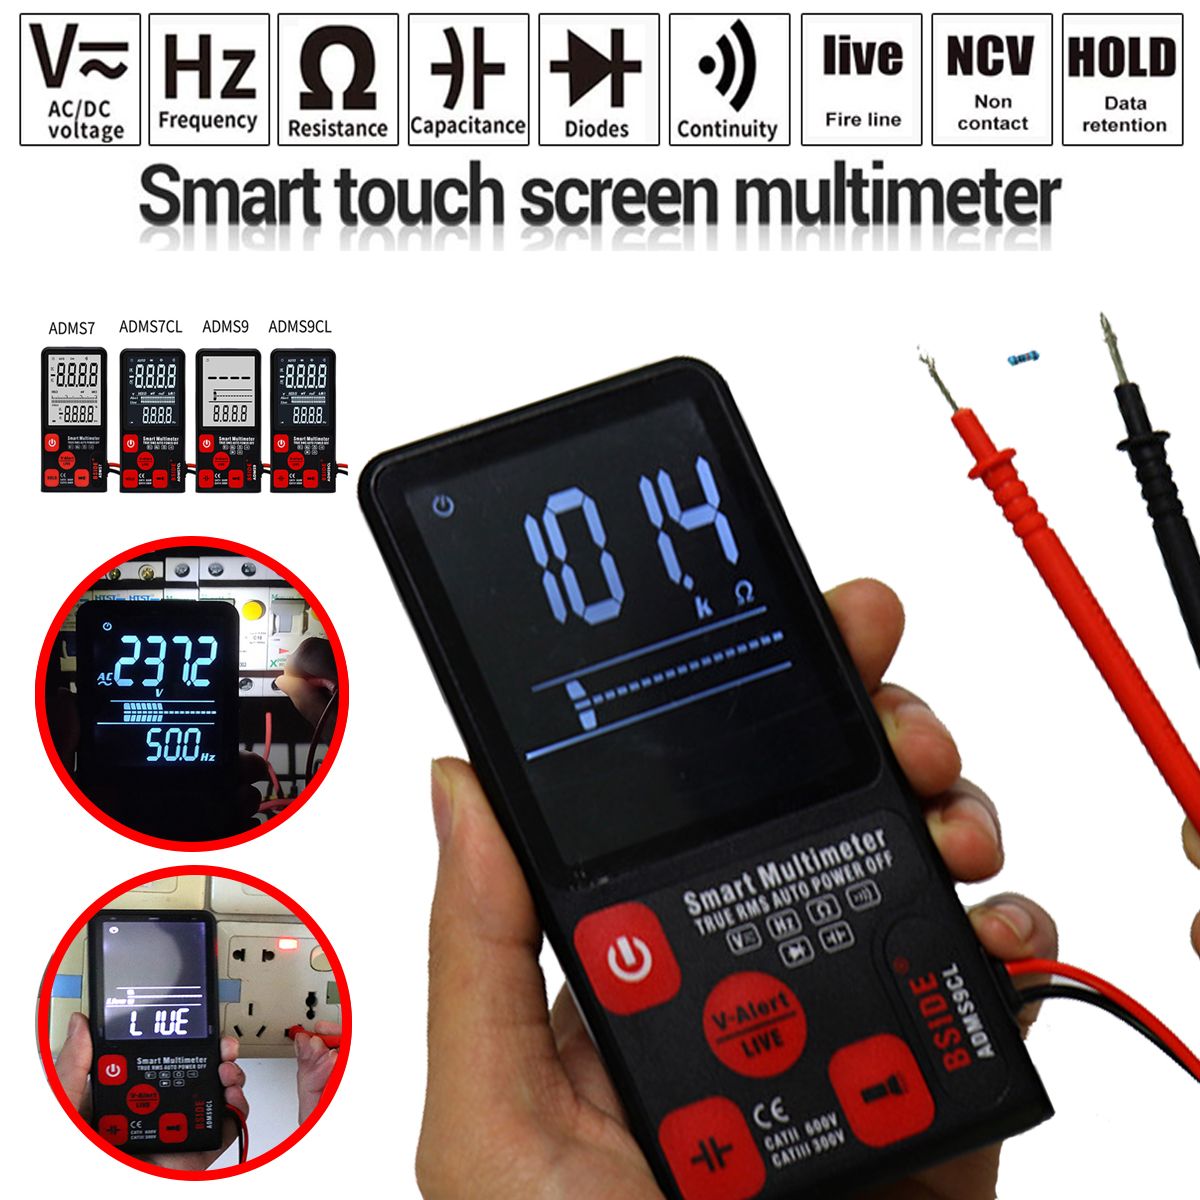 ADMS79-ADMS79-CL--Analog-Tester-Digital-Multimeter-Touch-DCAC-RMS-Multimeter-Transistor-Capacitor-1733095